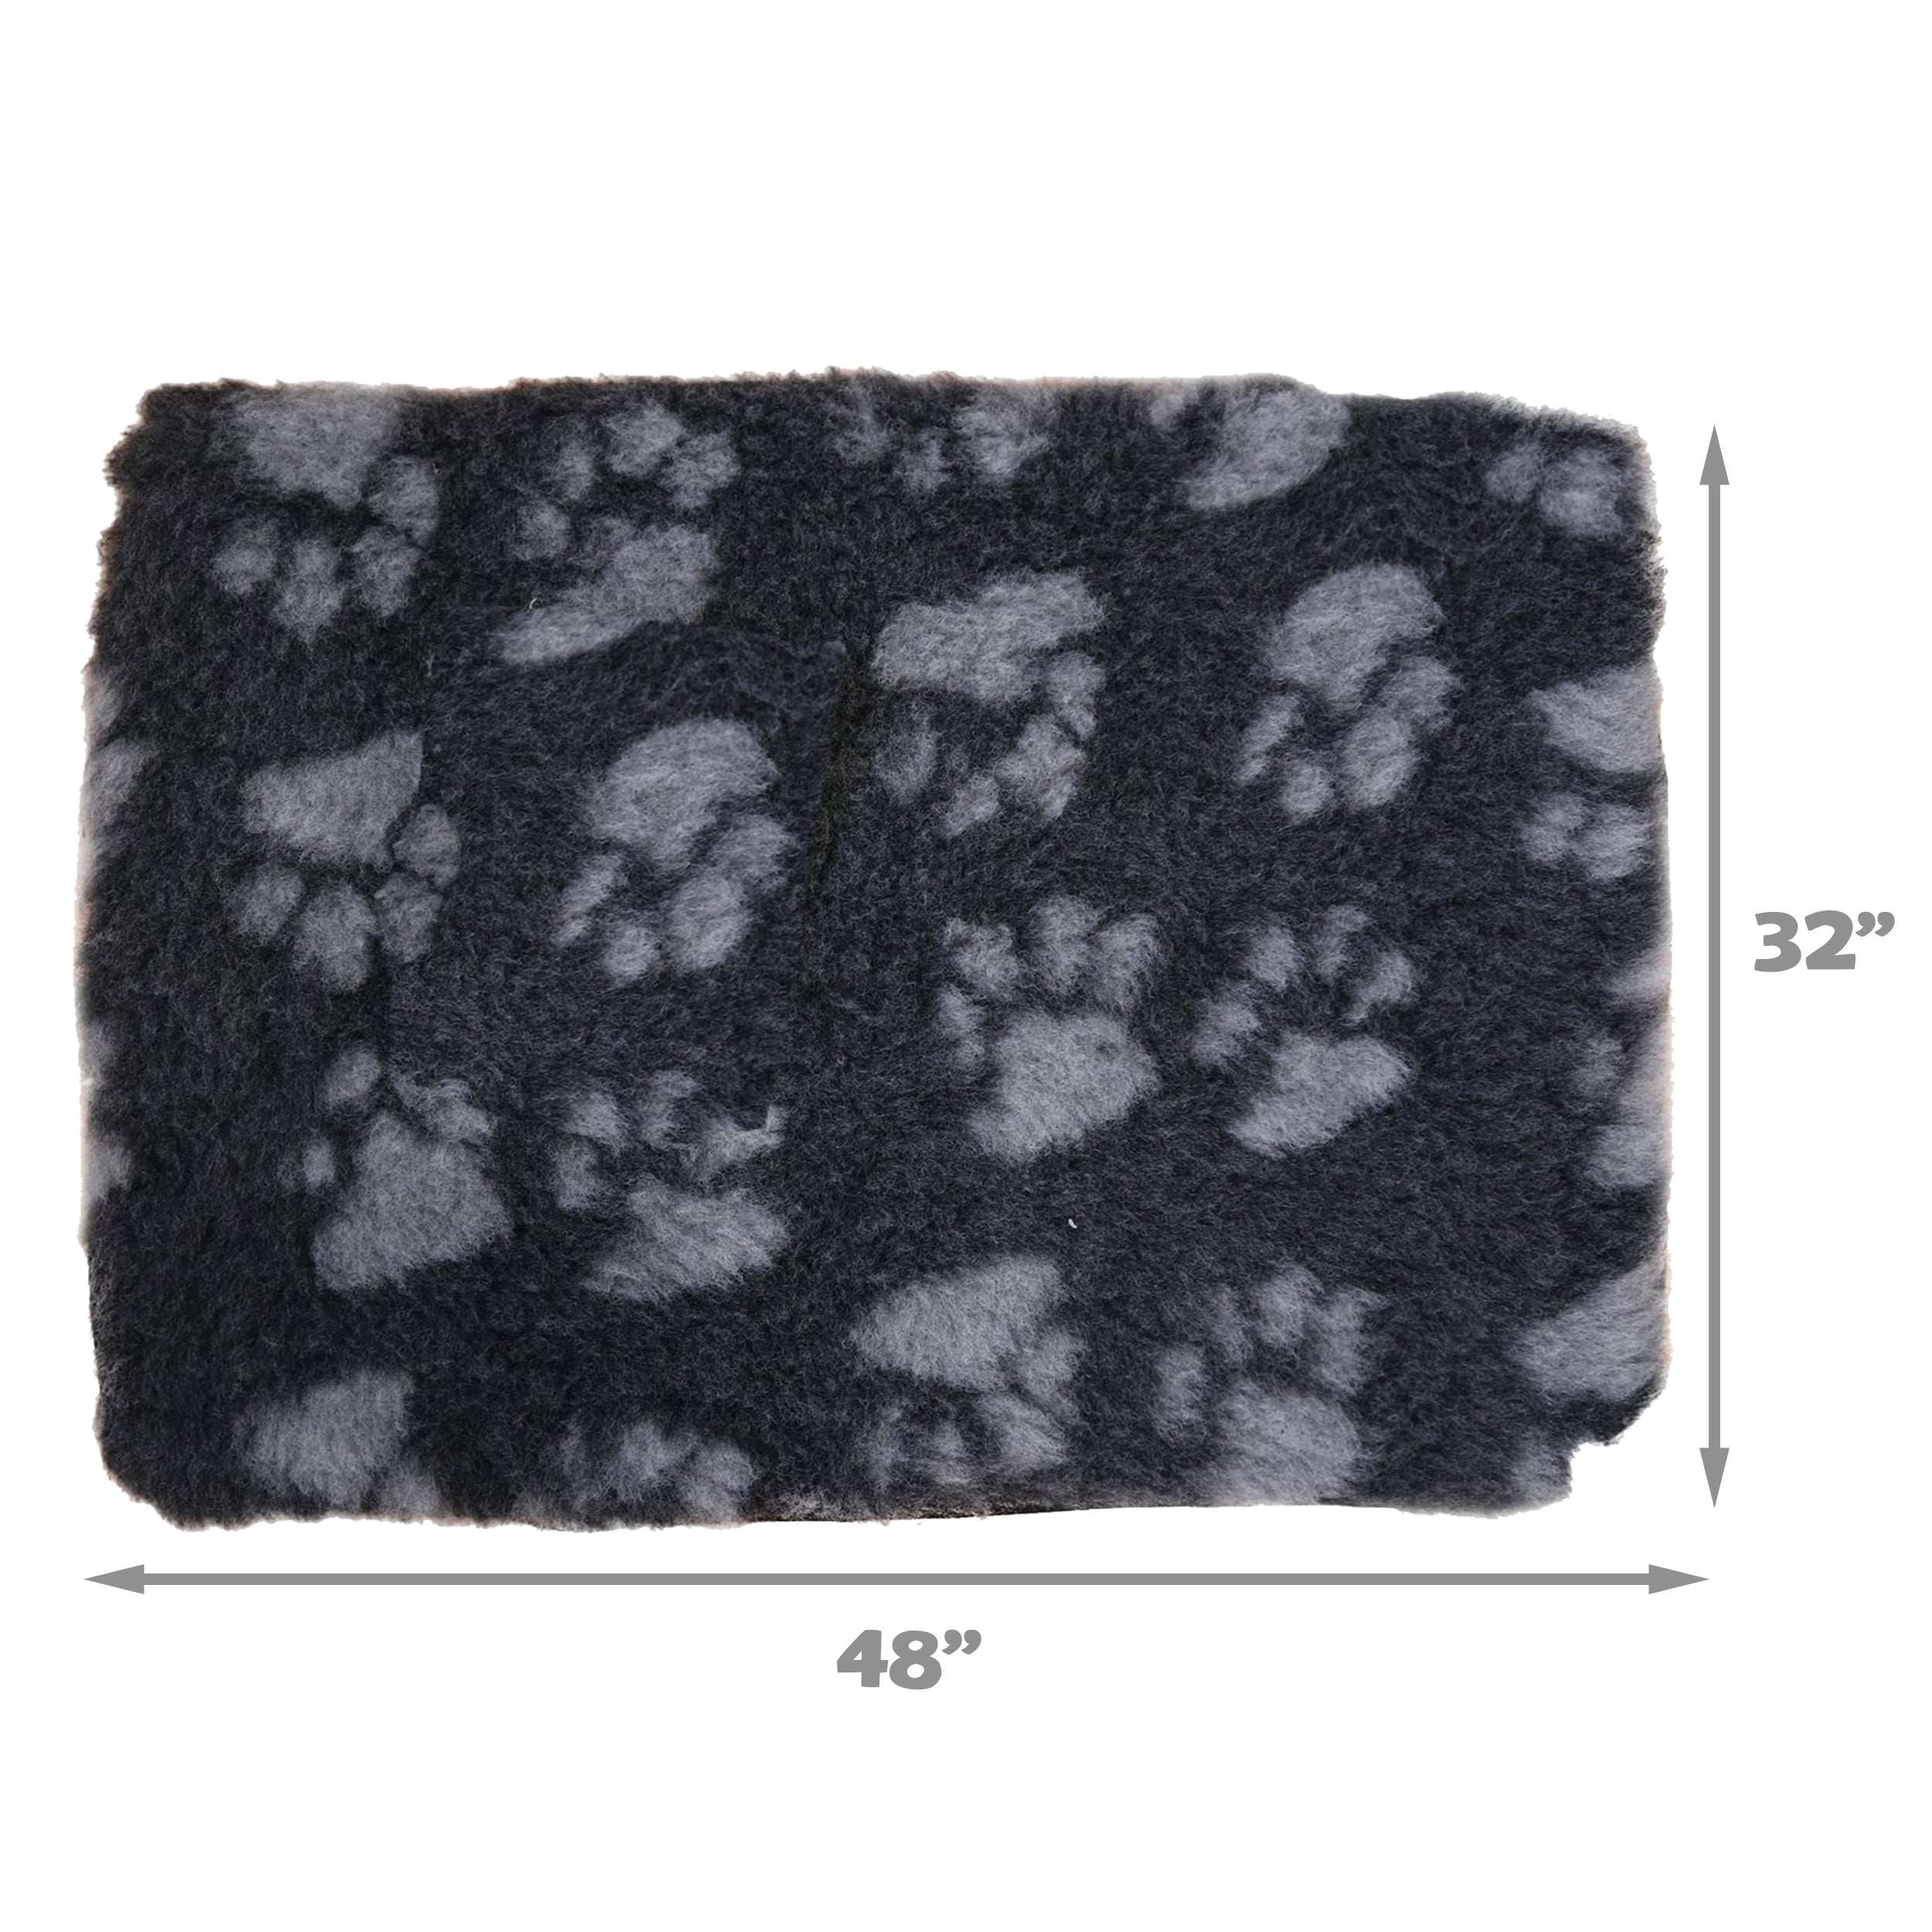 Lounge Sleeper Paw Print Mat for Dogs and Cats